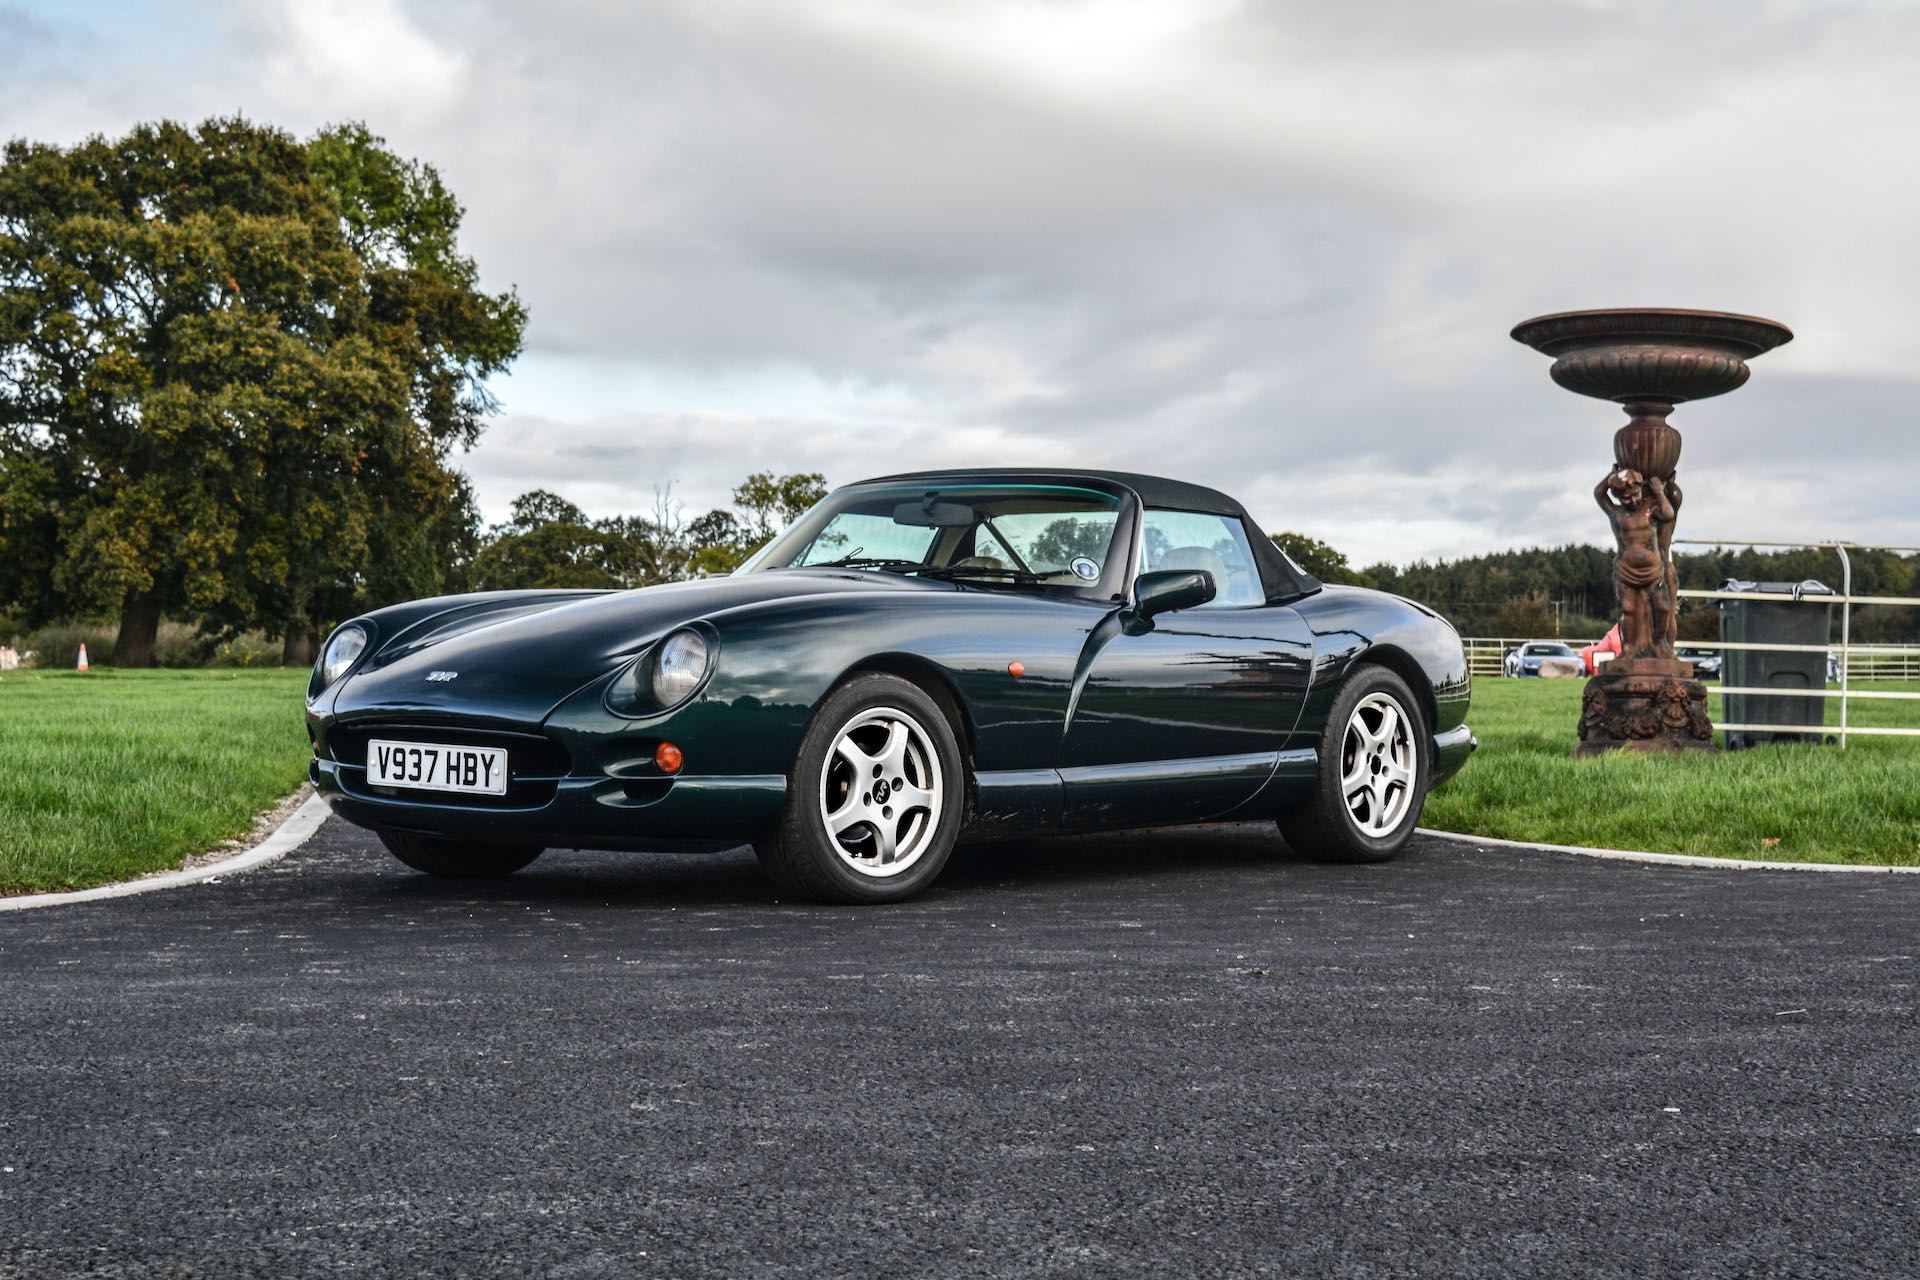 How You Can Own a Classic British Car